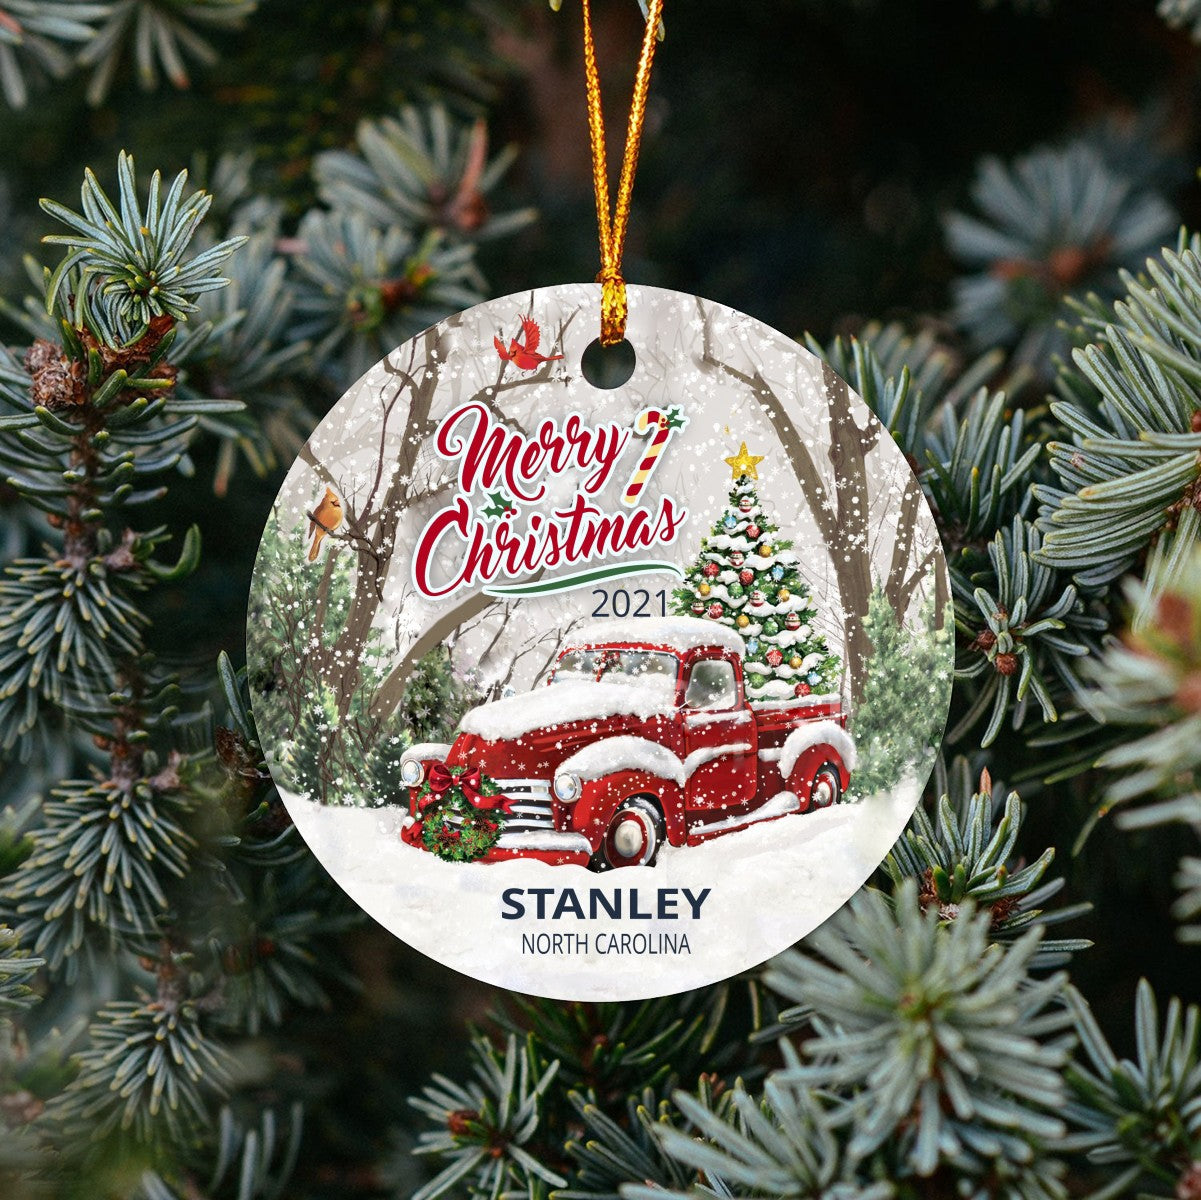 Christmas Tree Ornaments Stanley - Ornament With Name City, State Stanley North Carolina NC Ornament - Red Truck Xmas Ornaments 3'' Plastic Gift For Family, Friend And Housewarming